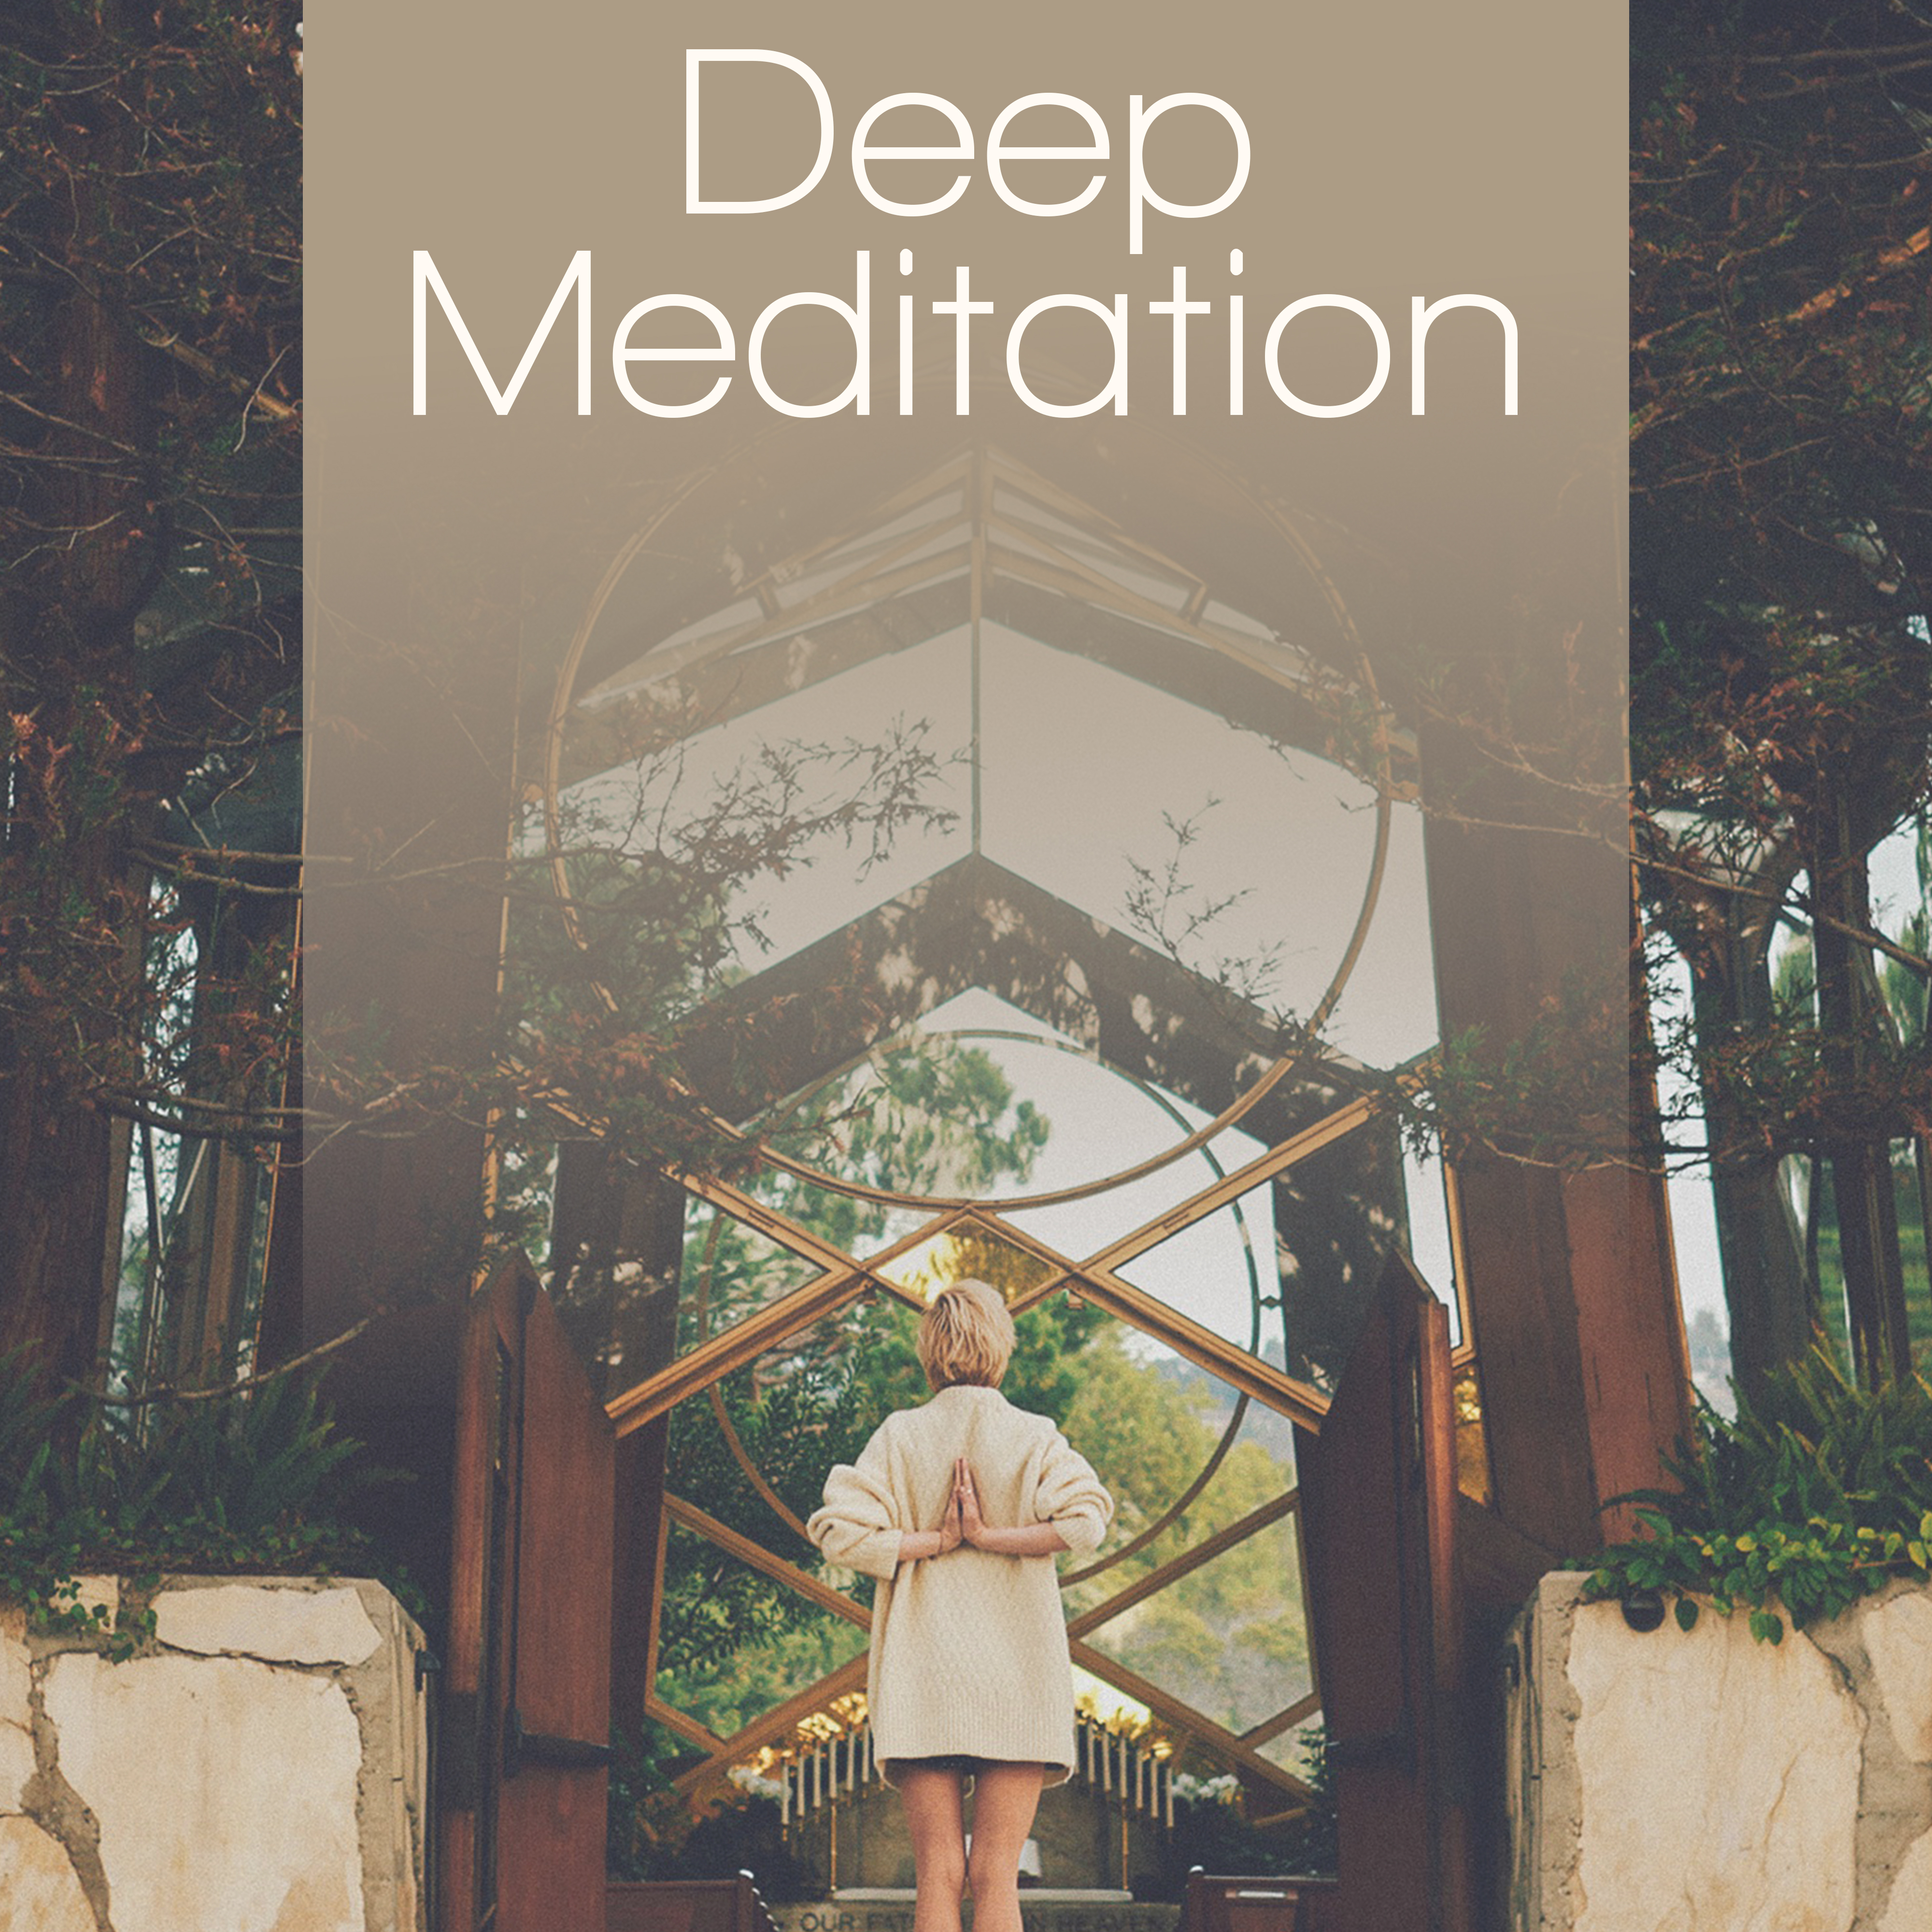 Deep Meditation – Relax, Yoga, Nature Sounds for Pure Mind, Harmony & Concentration, Soothing Piano, Relaxing Music, Stress Relief, Yoga Meditation